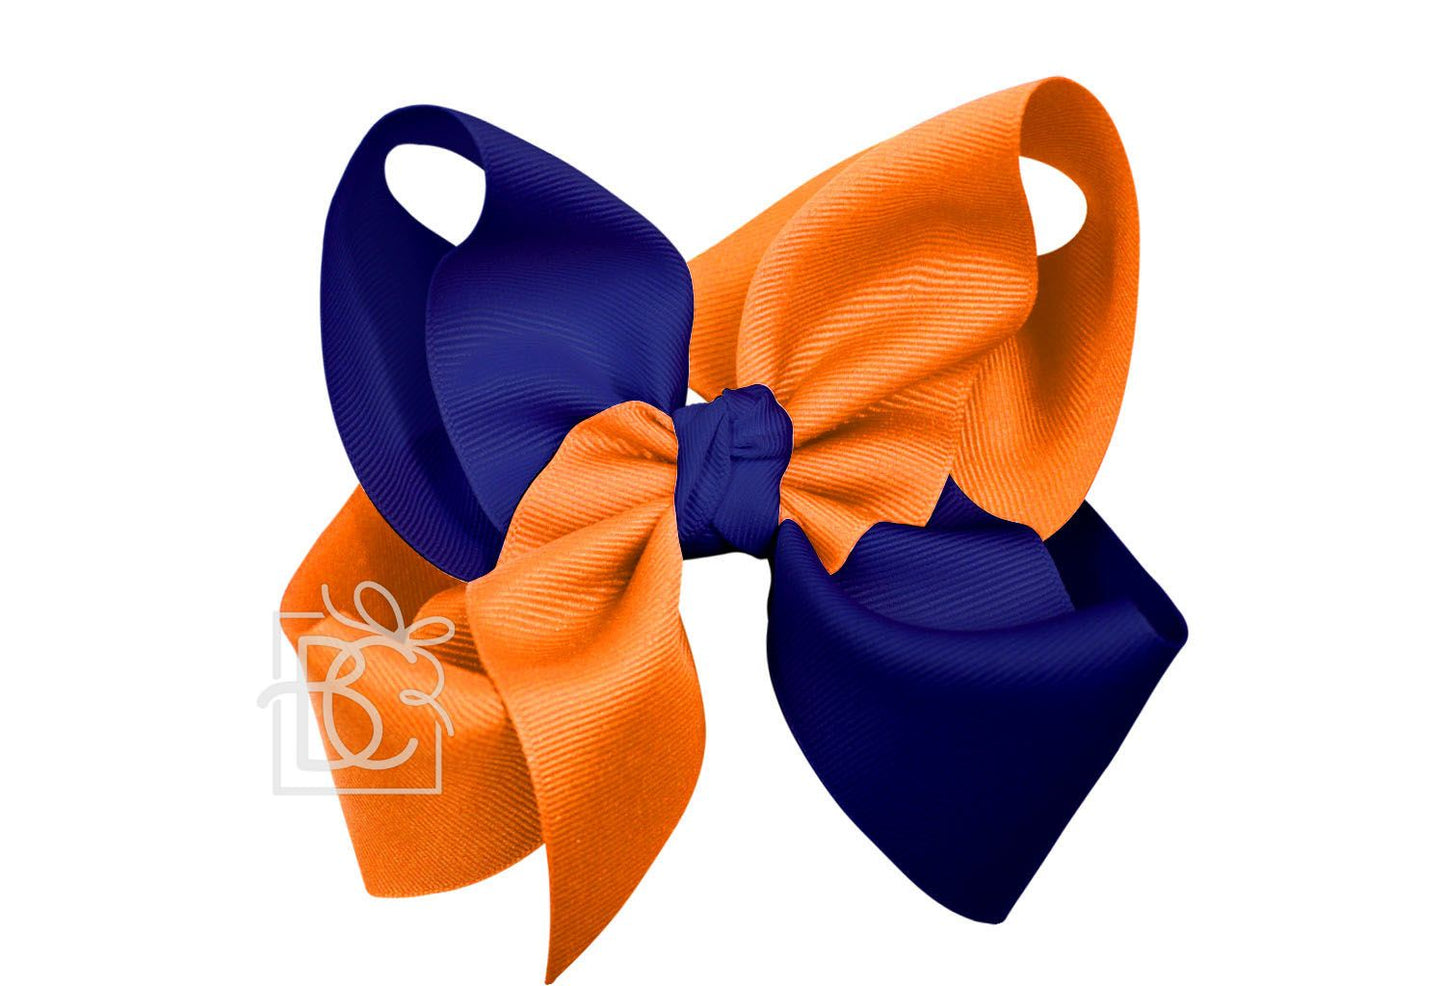 Criss Crossed Two-Colored School Colors Bow